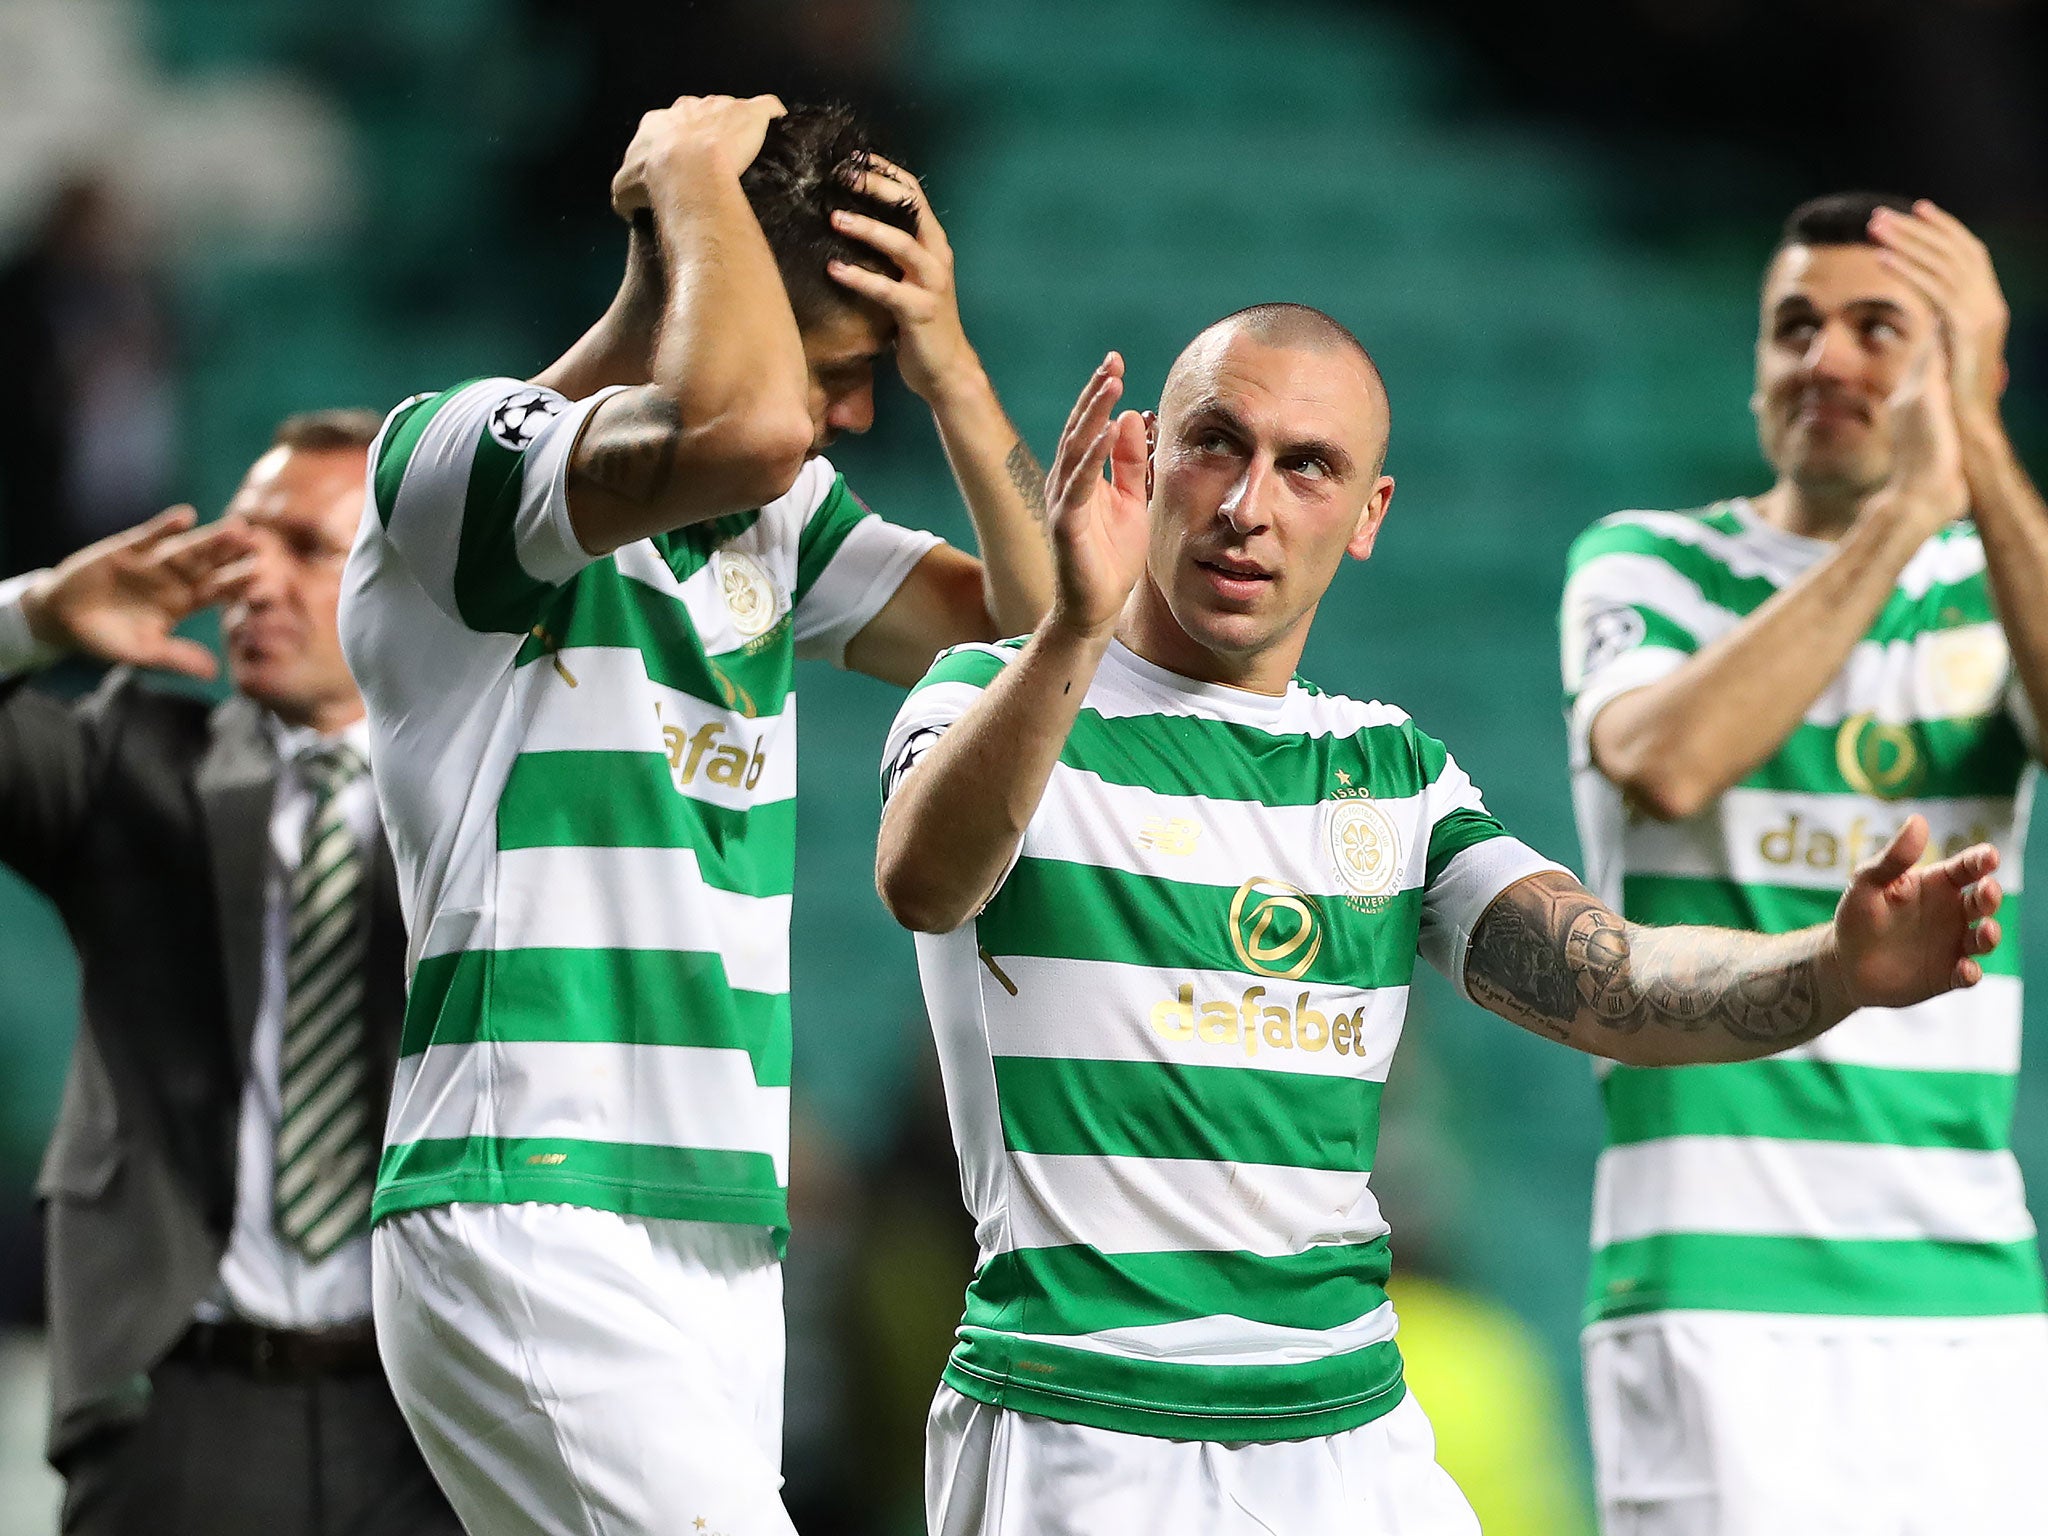 Celtic's players celebrate after securing their place in the Champions League group stages